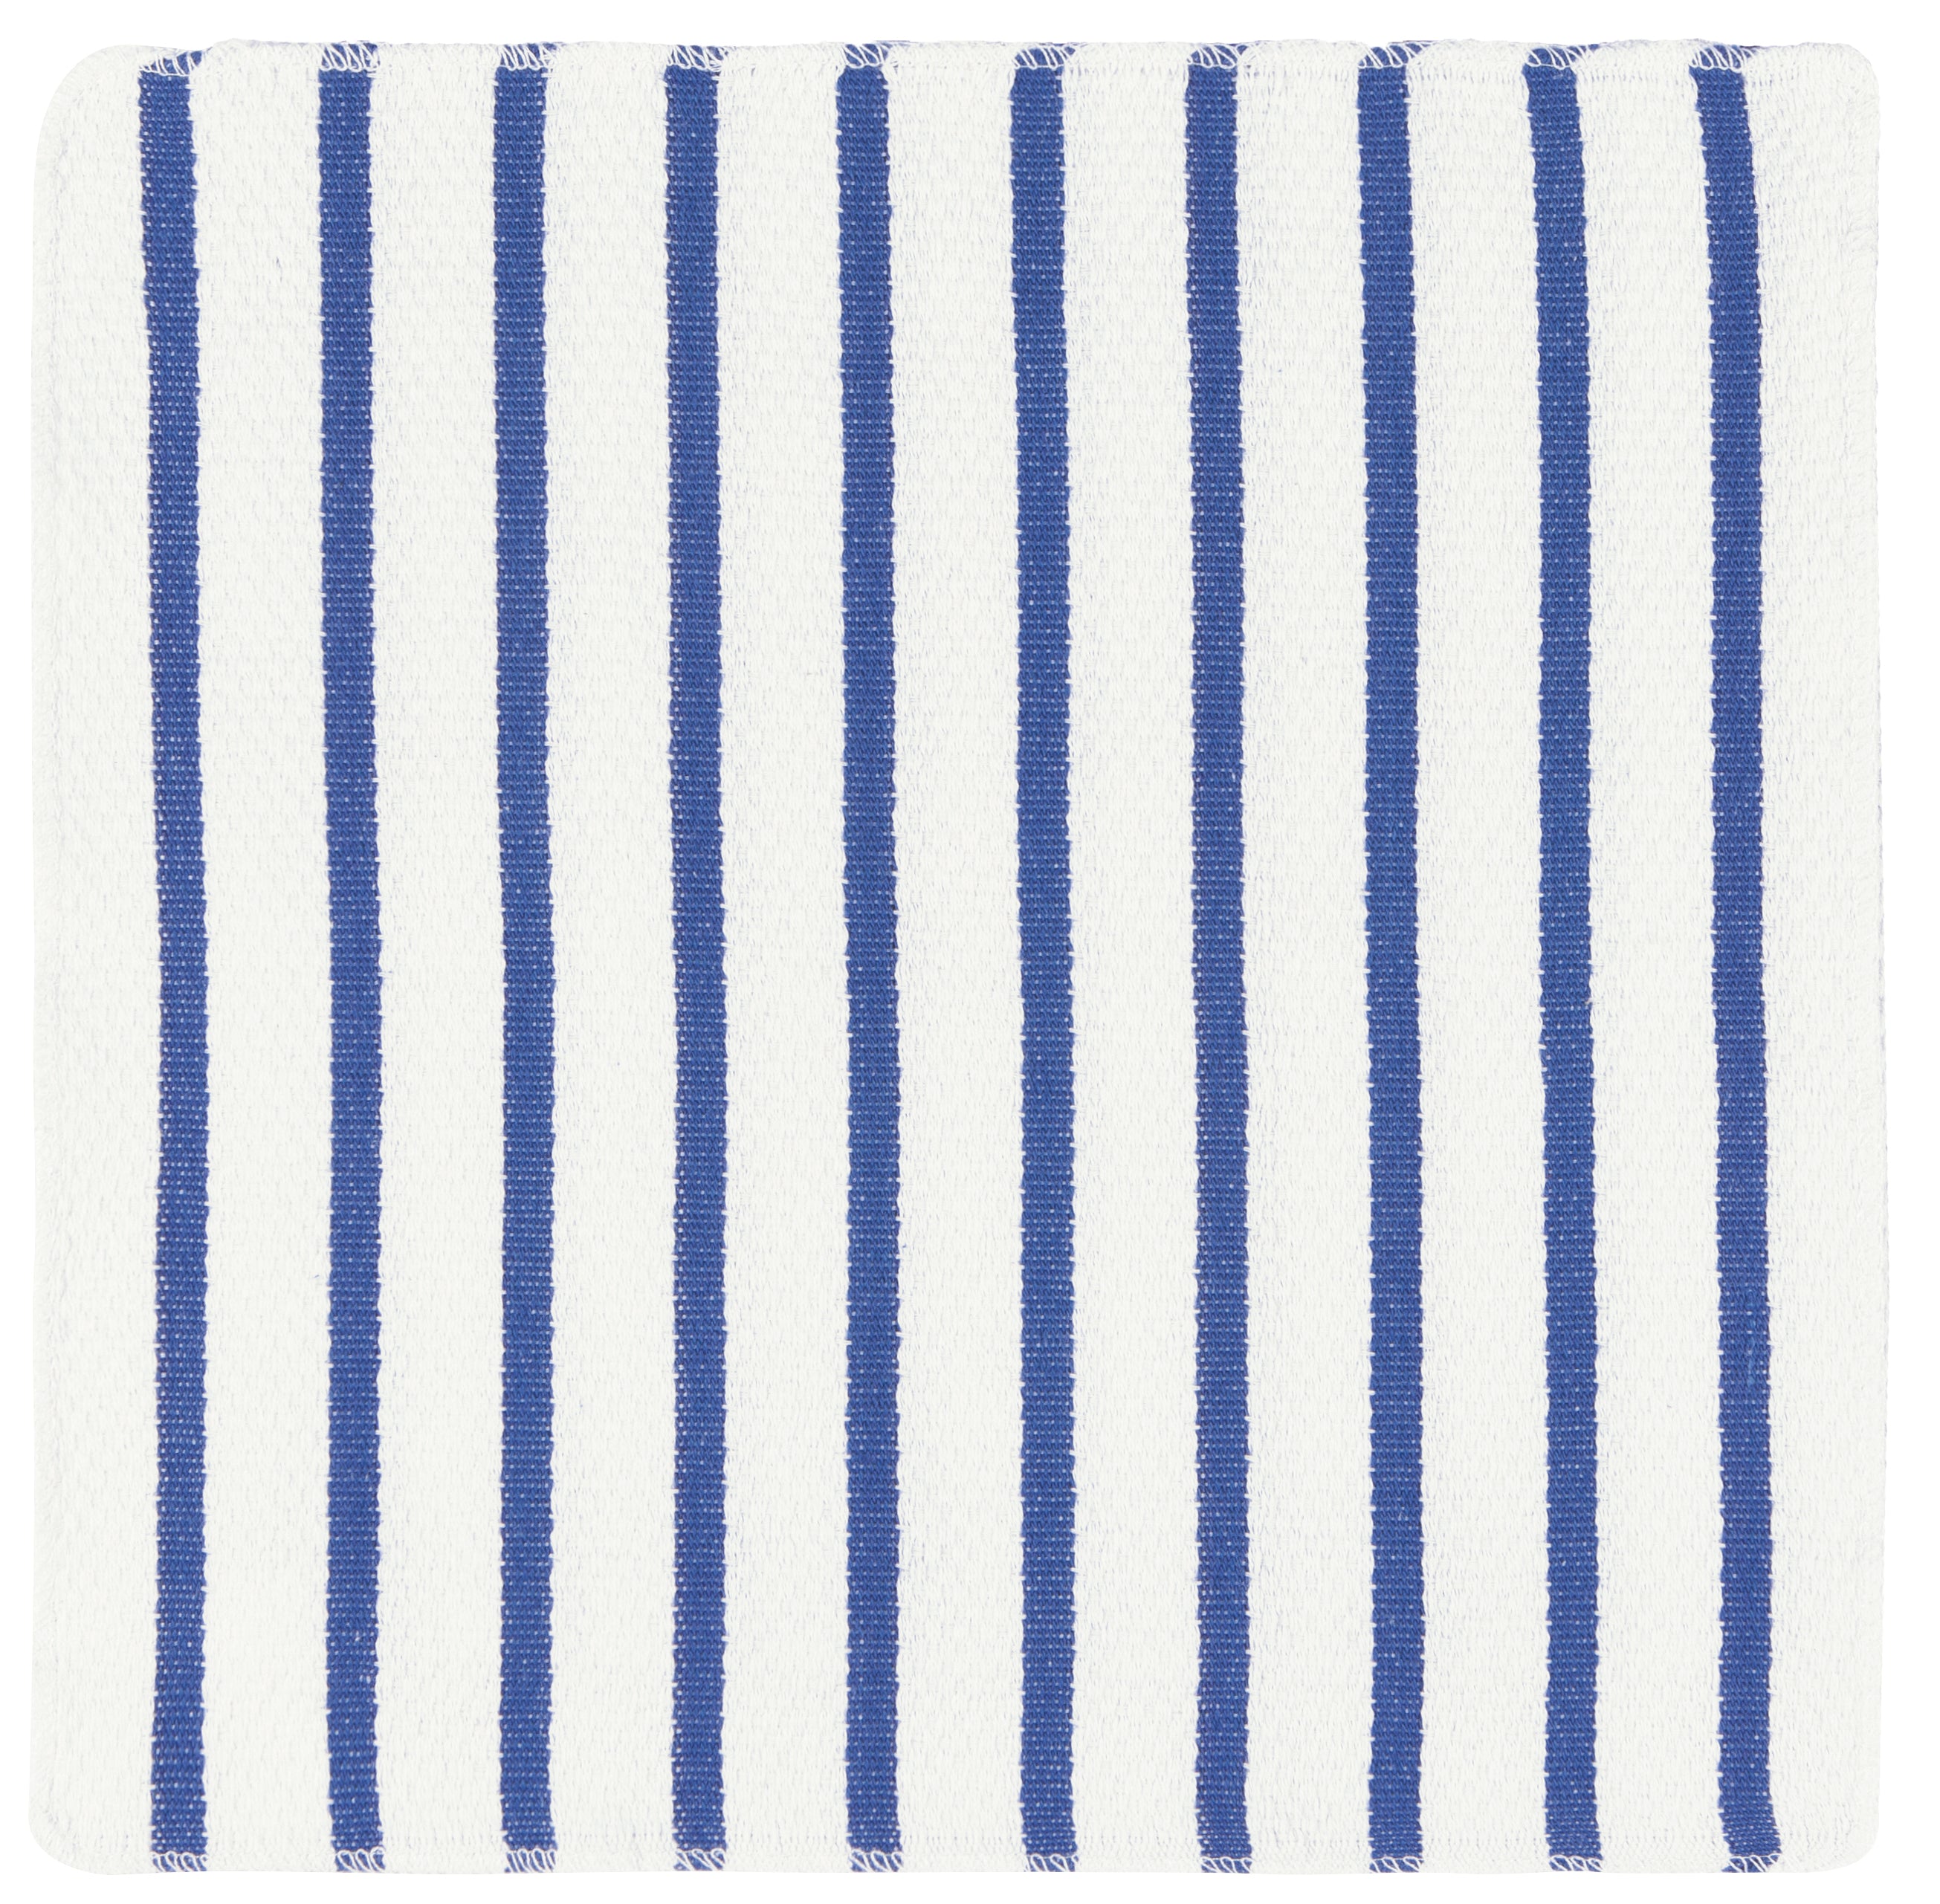 (White / Royal Blue) -- Basketweave Dishcloths, Set of 2  by Now Designs®